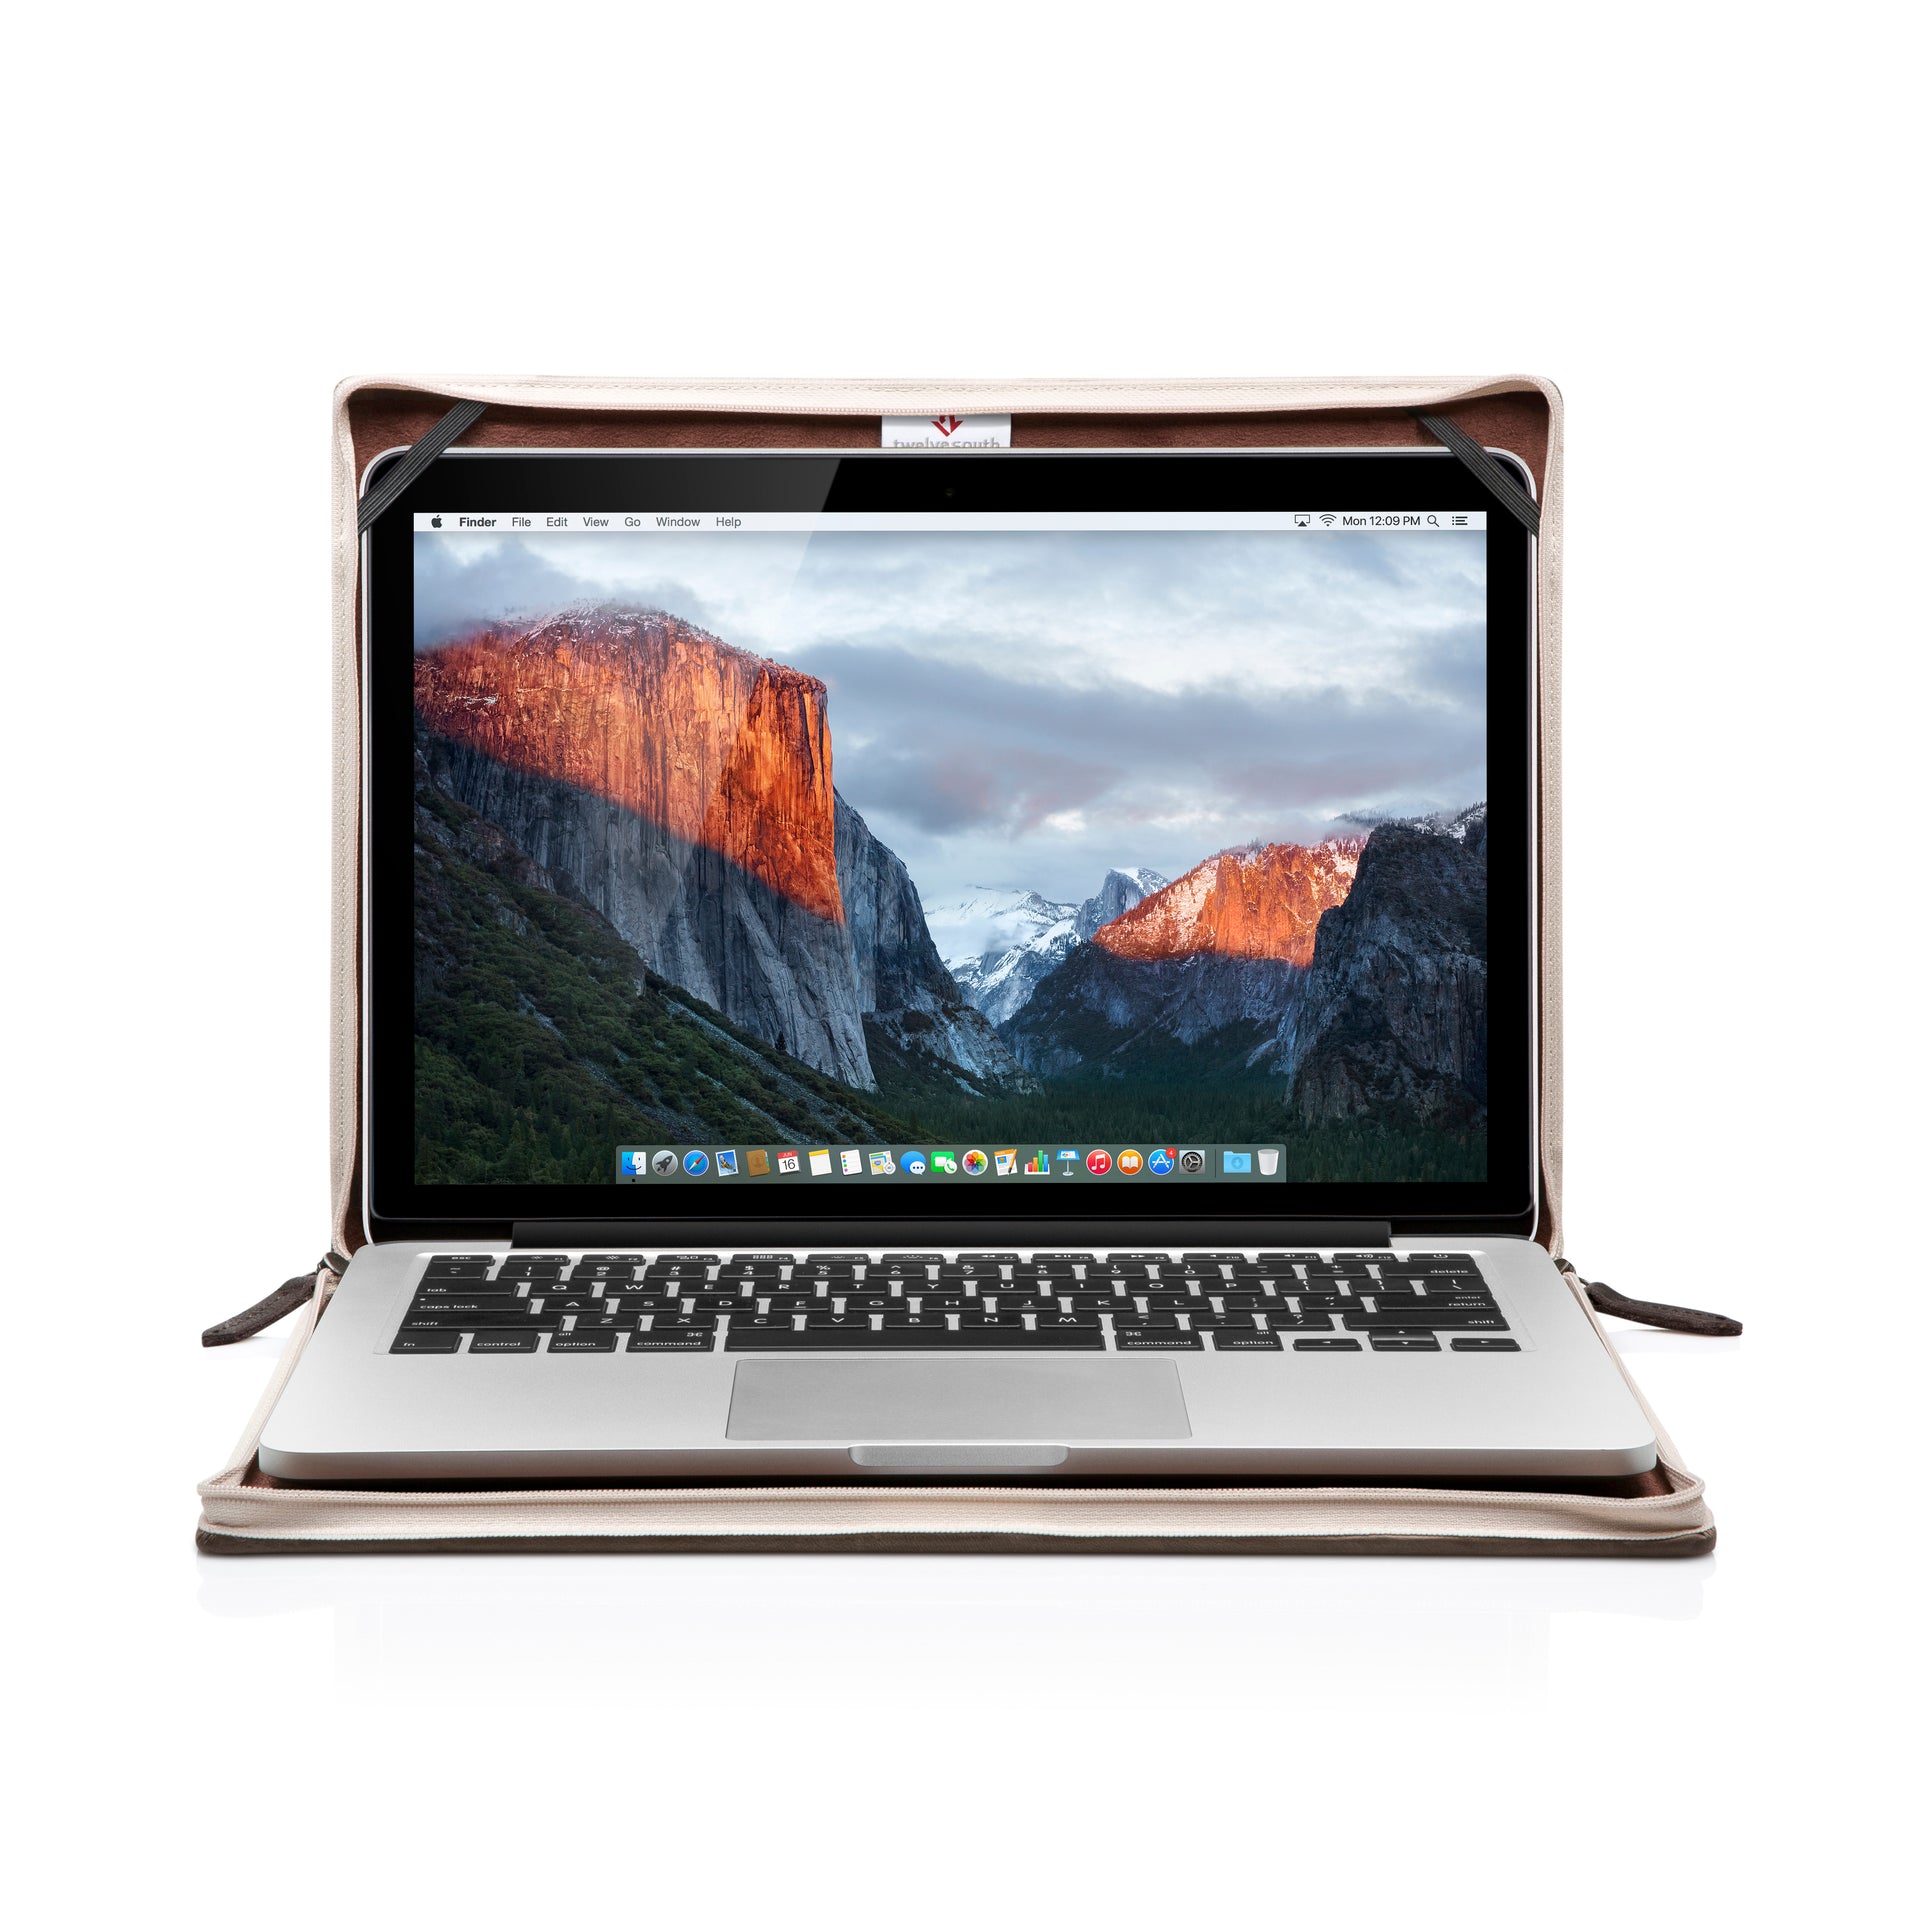  Non-Breaking News: BookBook Saves MacBook Air From Freeway Fall